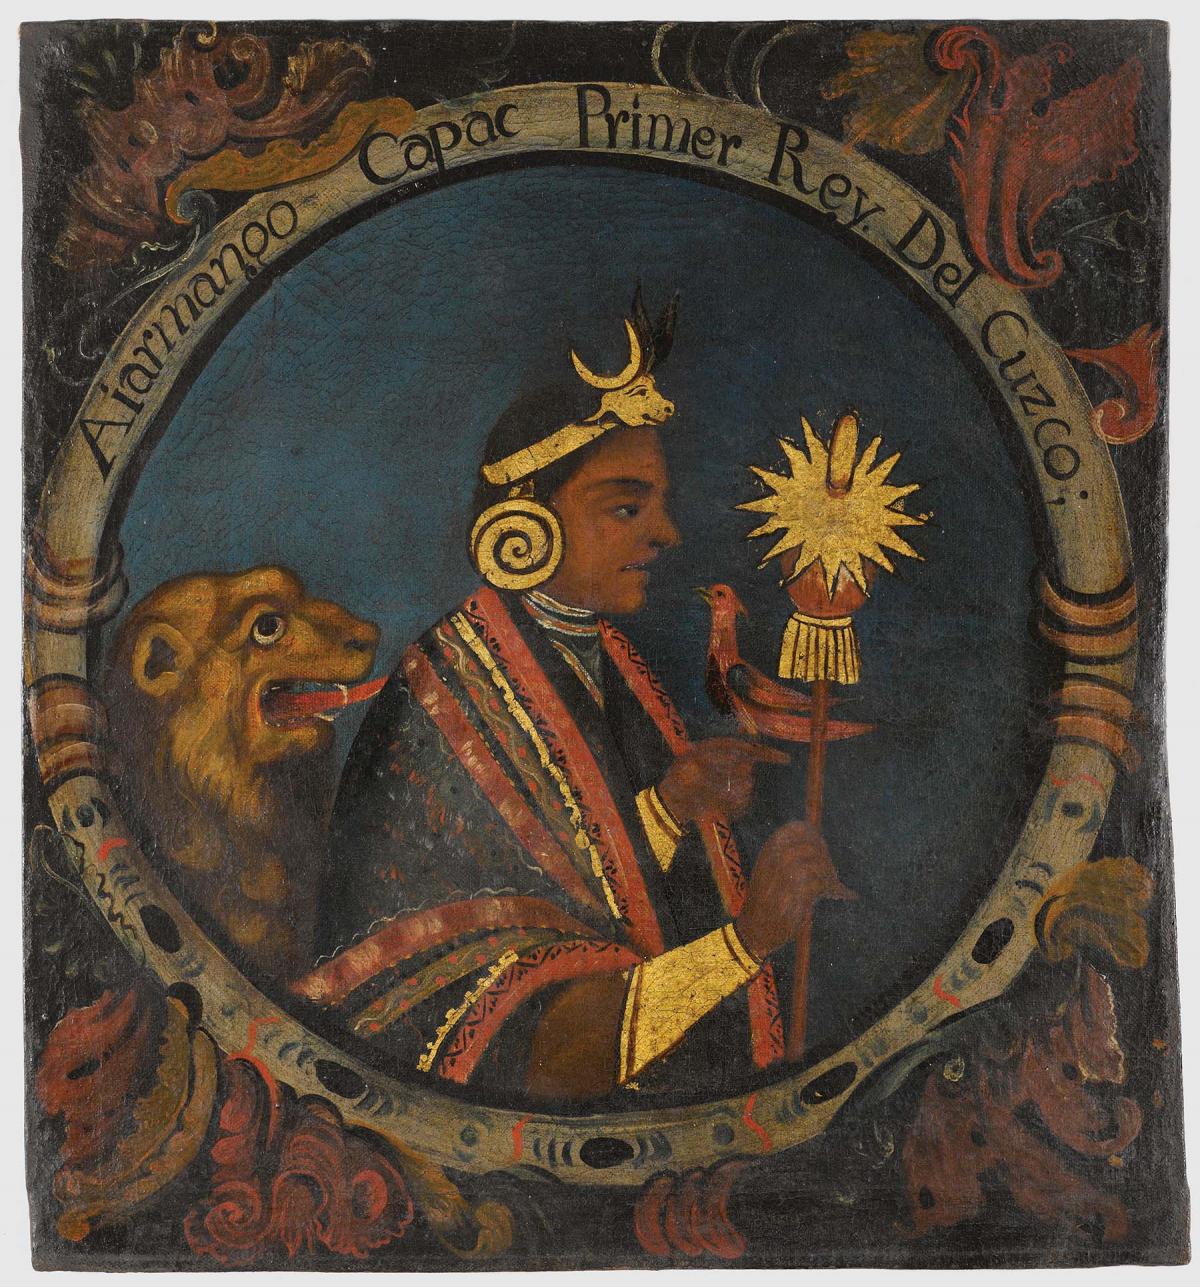 Incan king in profile, wearing a gold crown, holding a gold, sun-topped scepter, with a lion sitting behind him